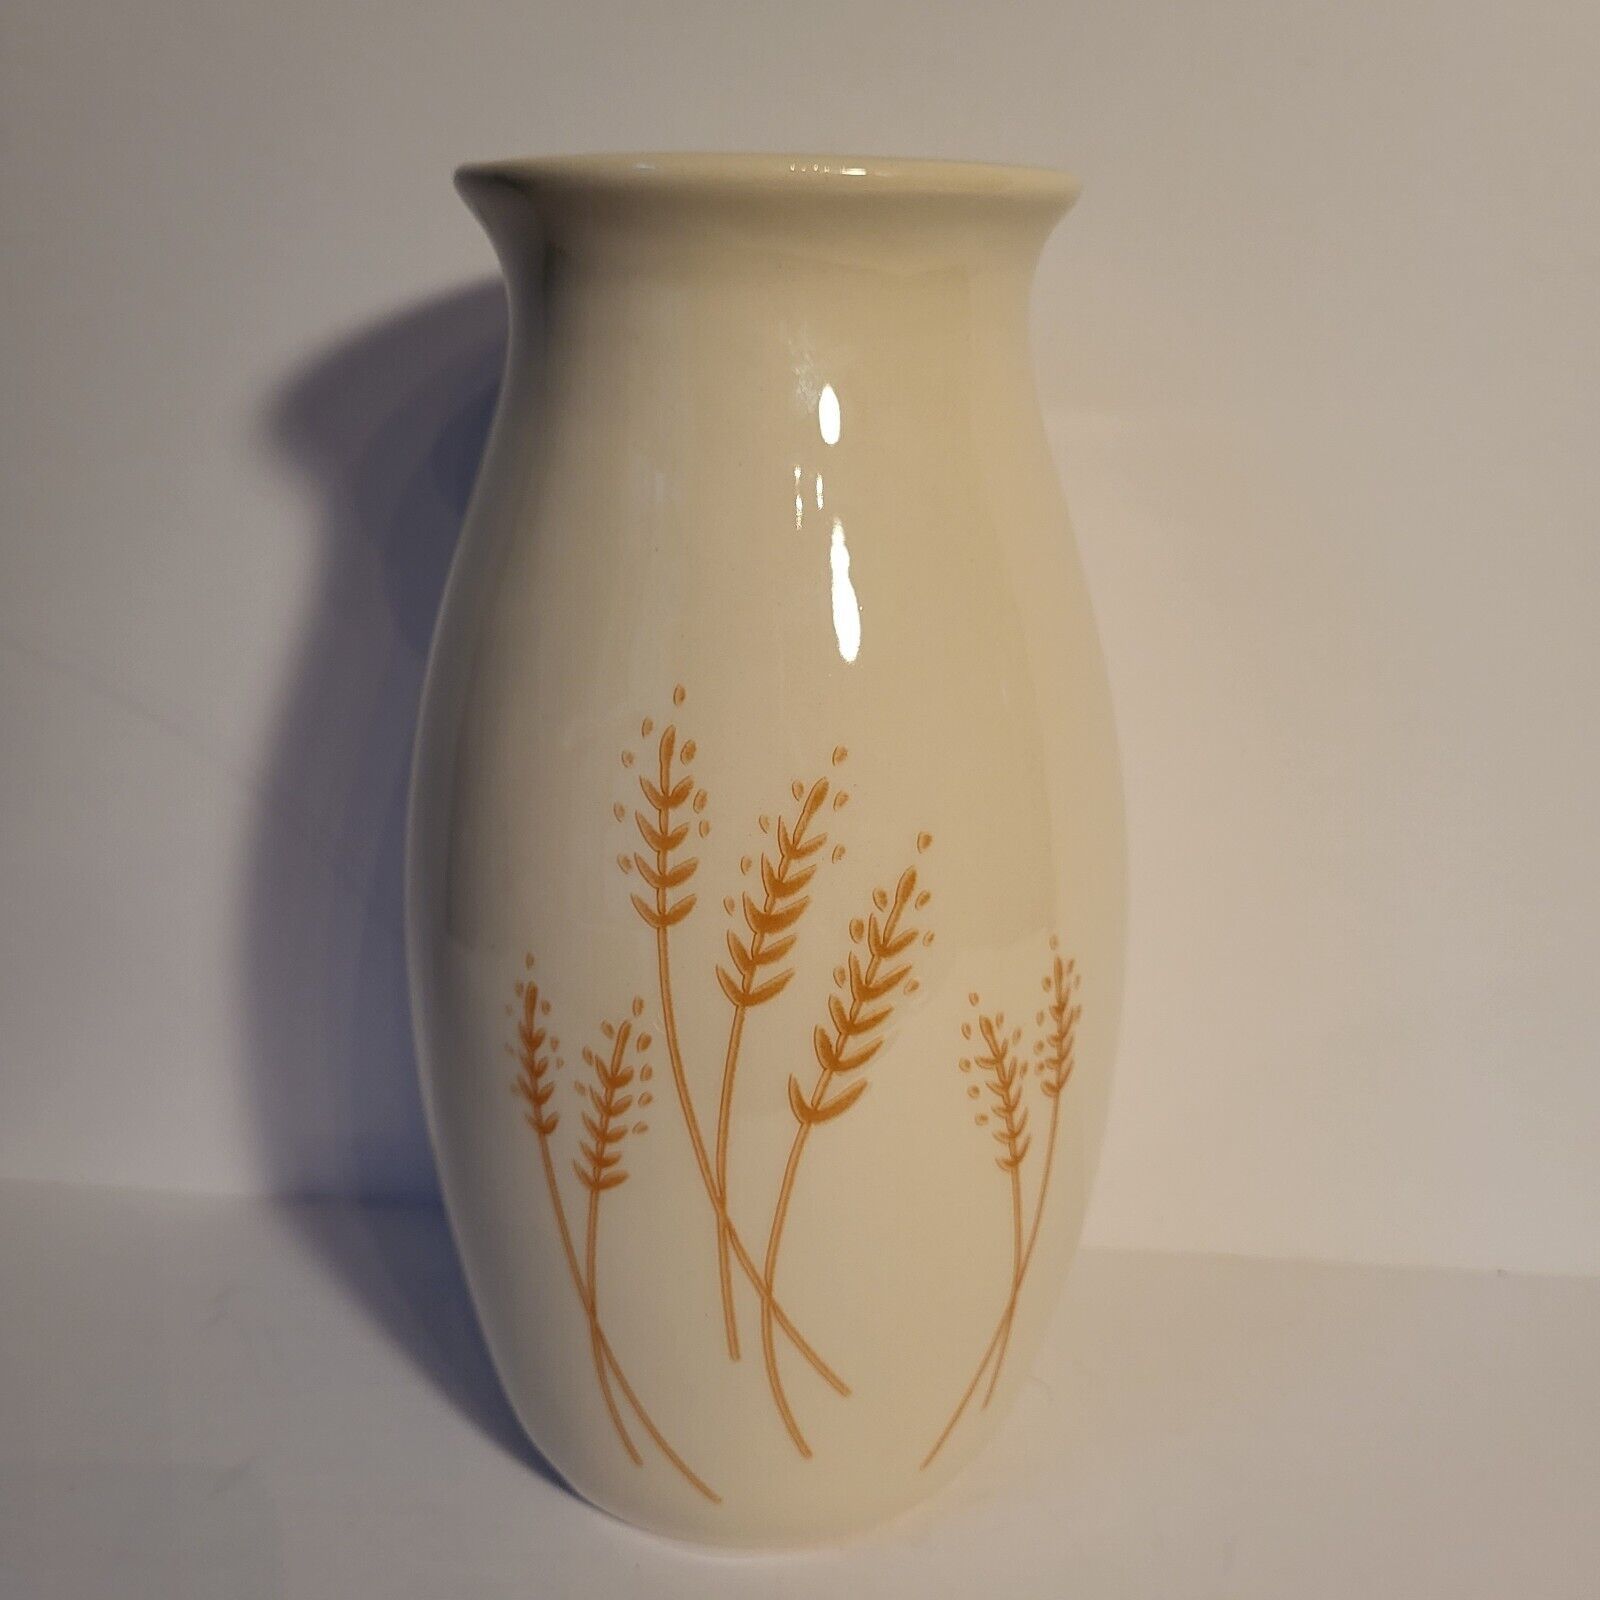 Beige Ceramic Wheat Vase by Ashland from Michael's 9.5" Tall NWT Fall Autumn - $13.98